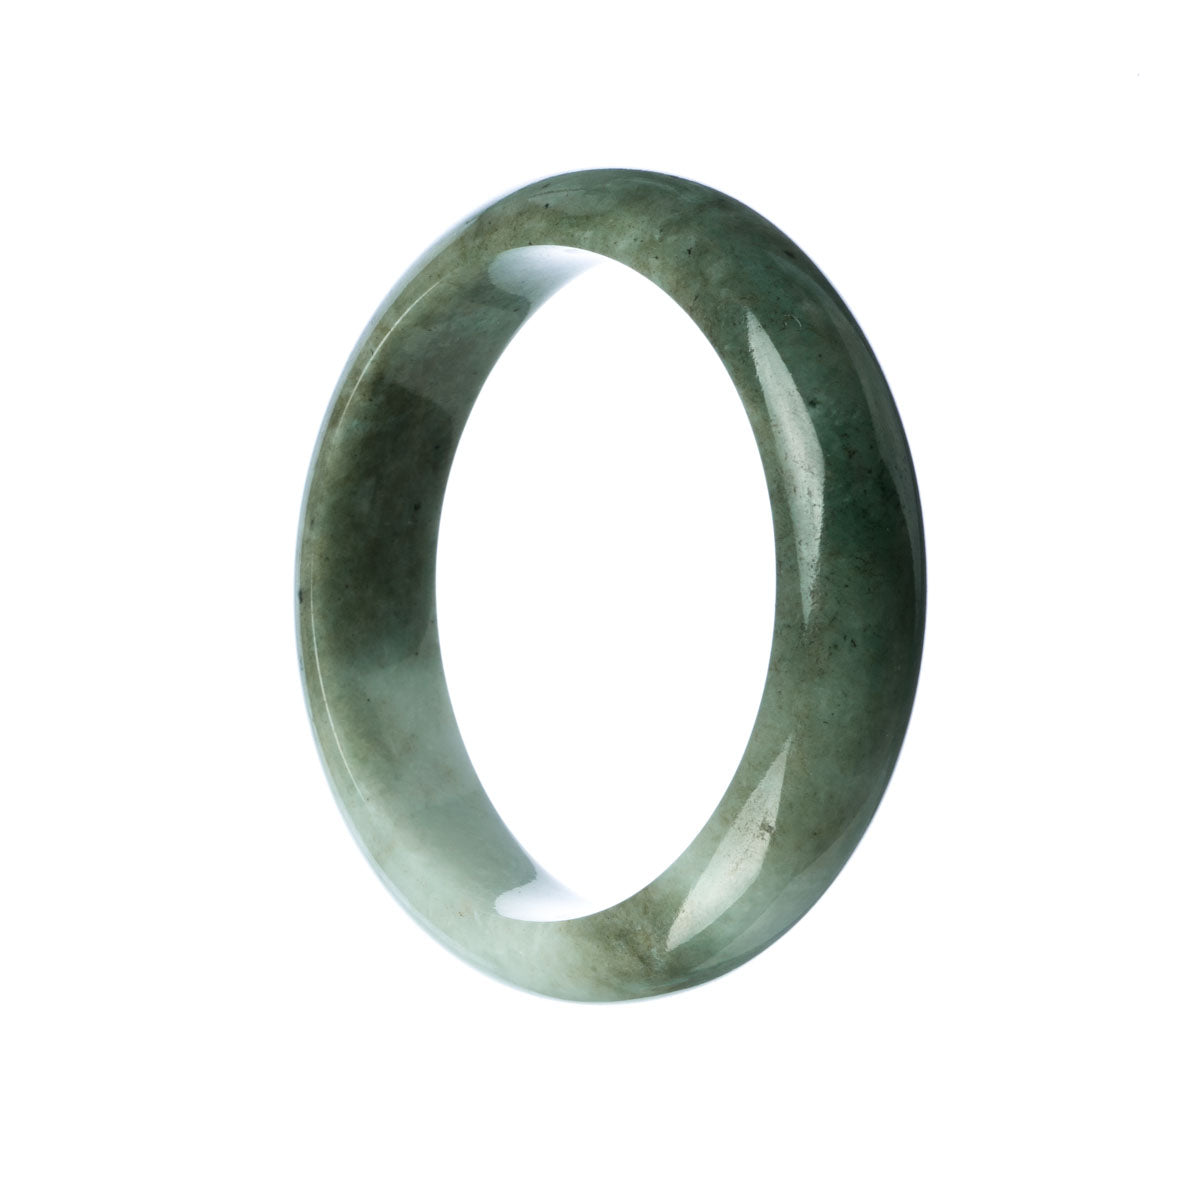 A half moon-shaped white jade bangle bracelet with a traditional green hue, certified as Type A.